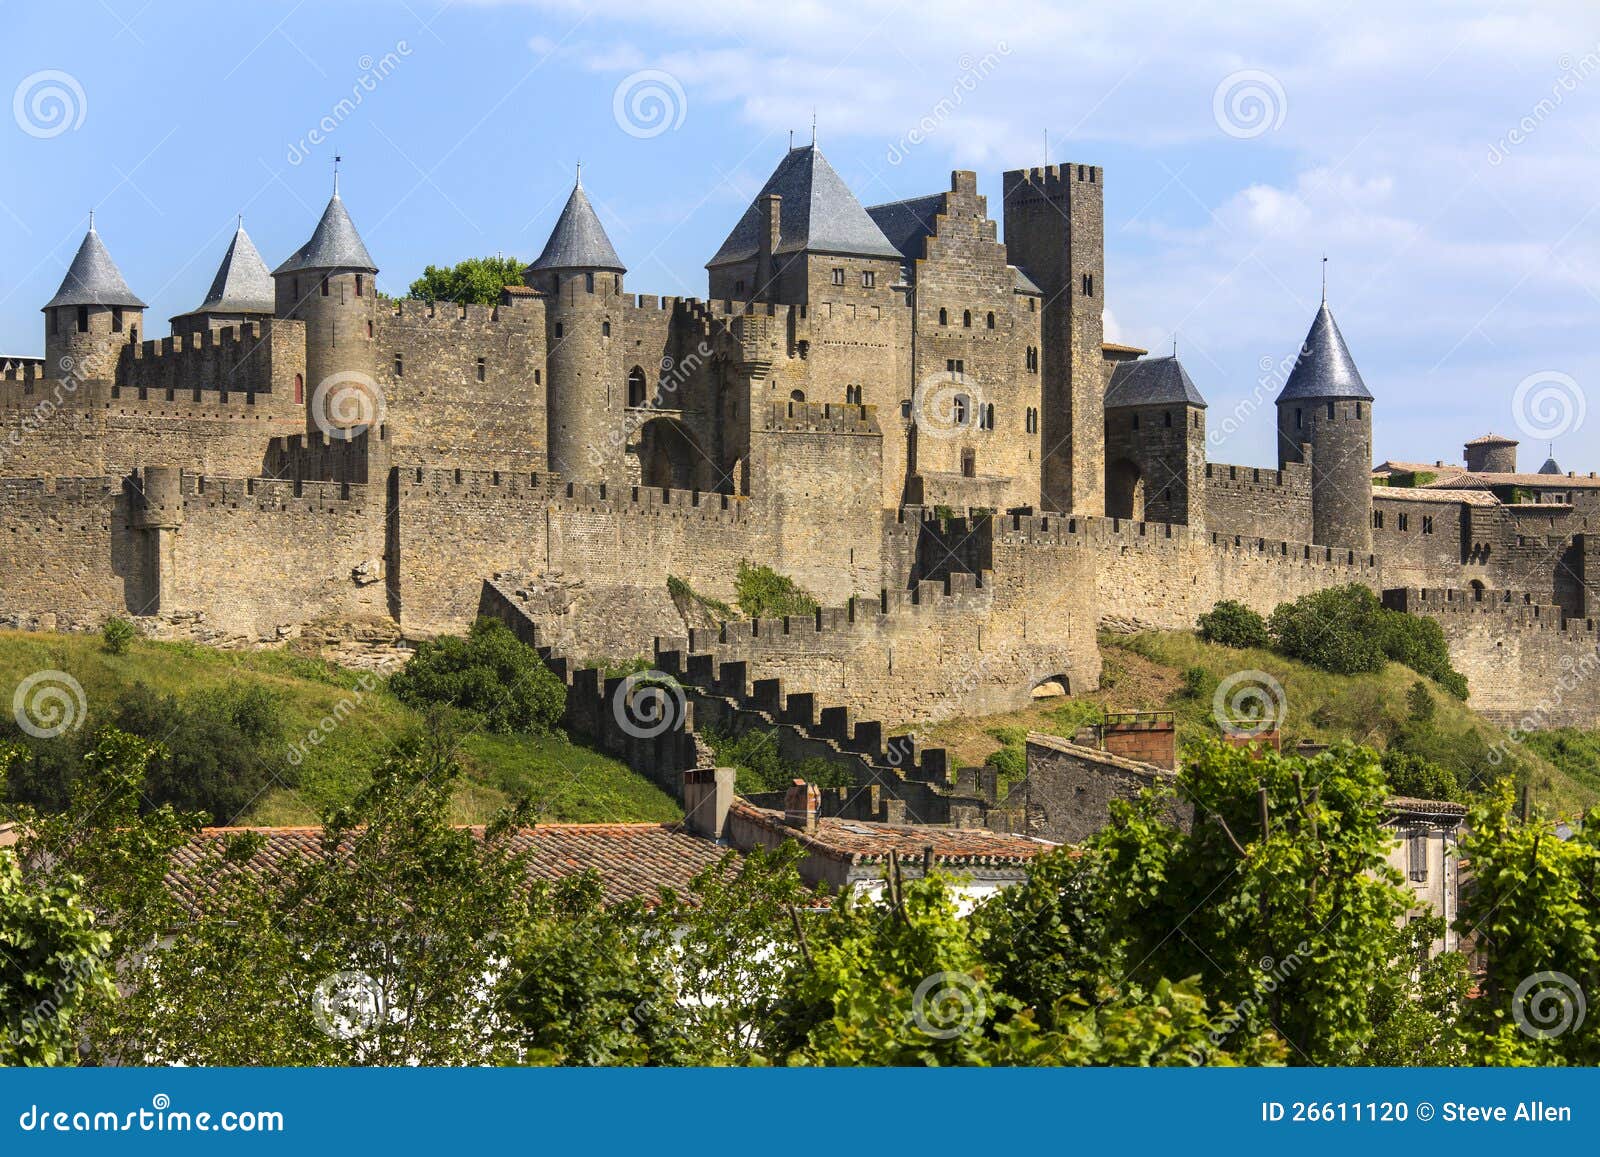 carcassonne fortress - france